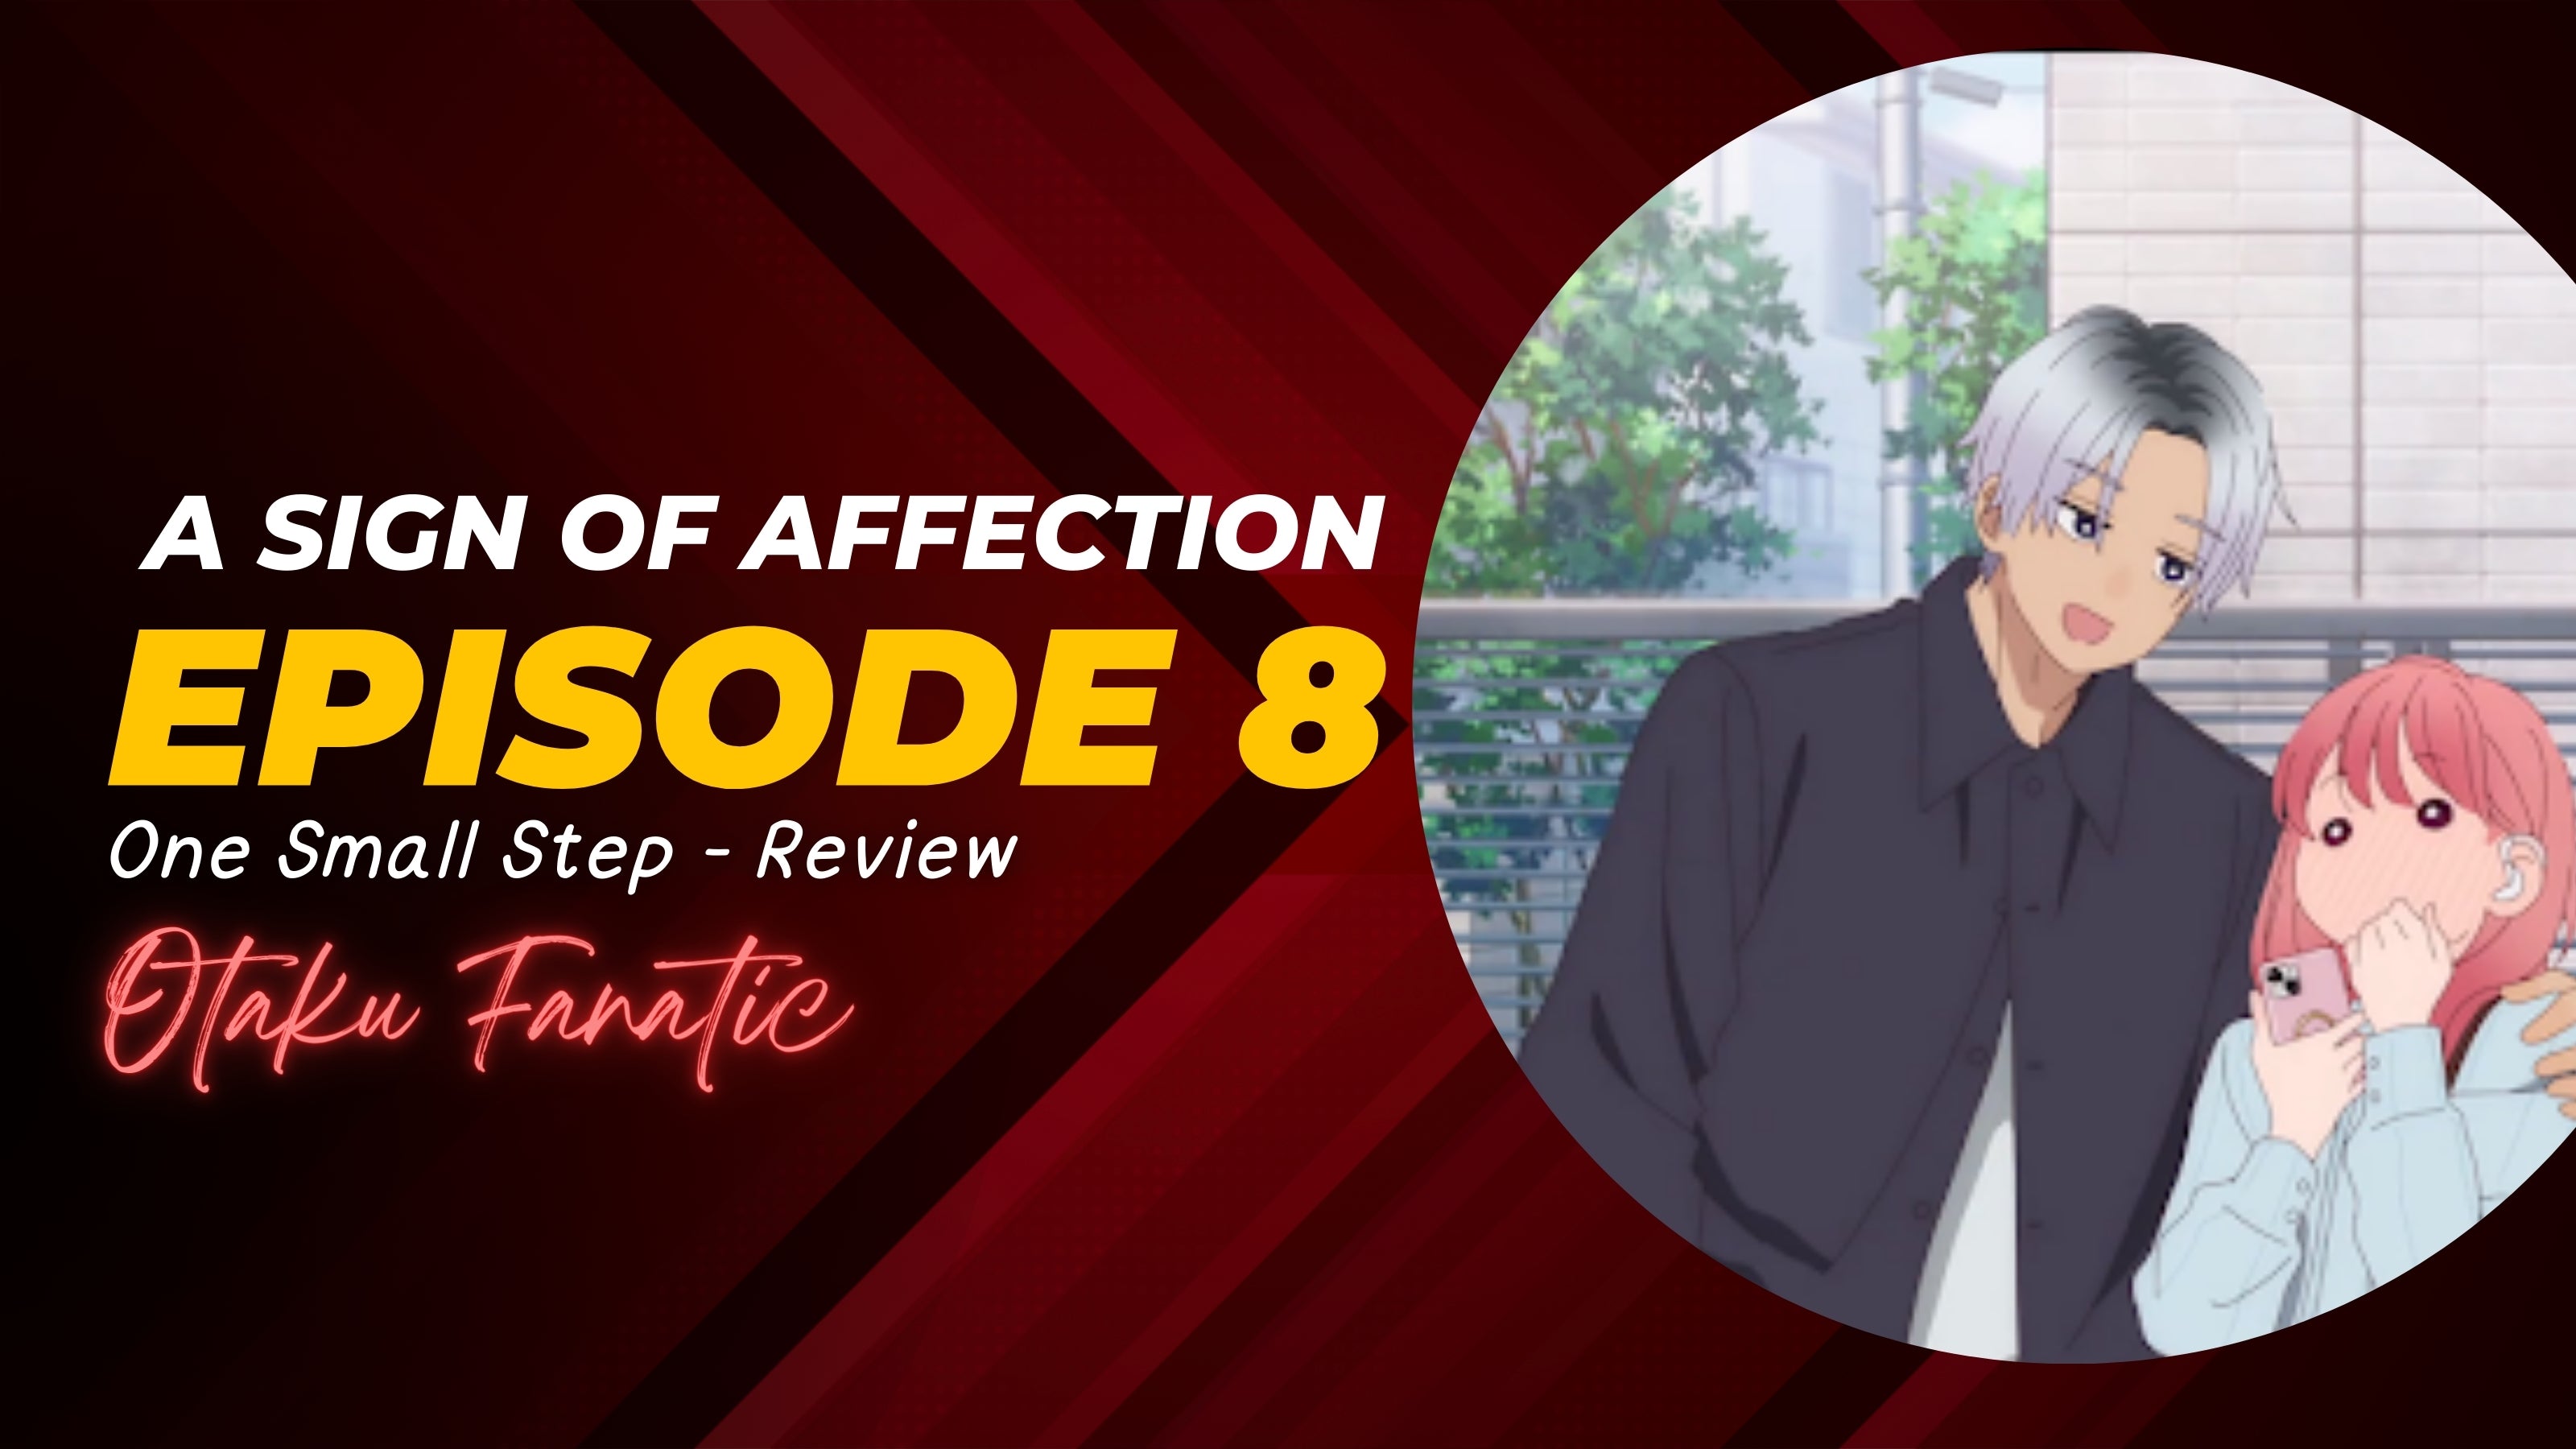 A Sign Of Affection Episode 8 - One Small Step - Review | Otaku Fanatic